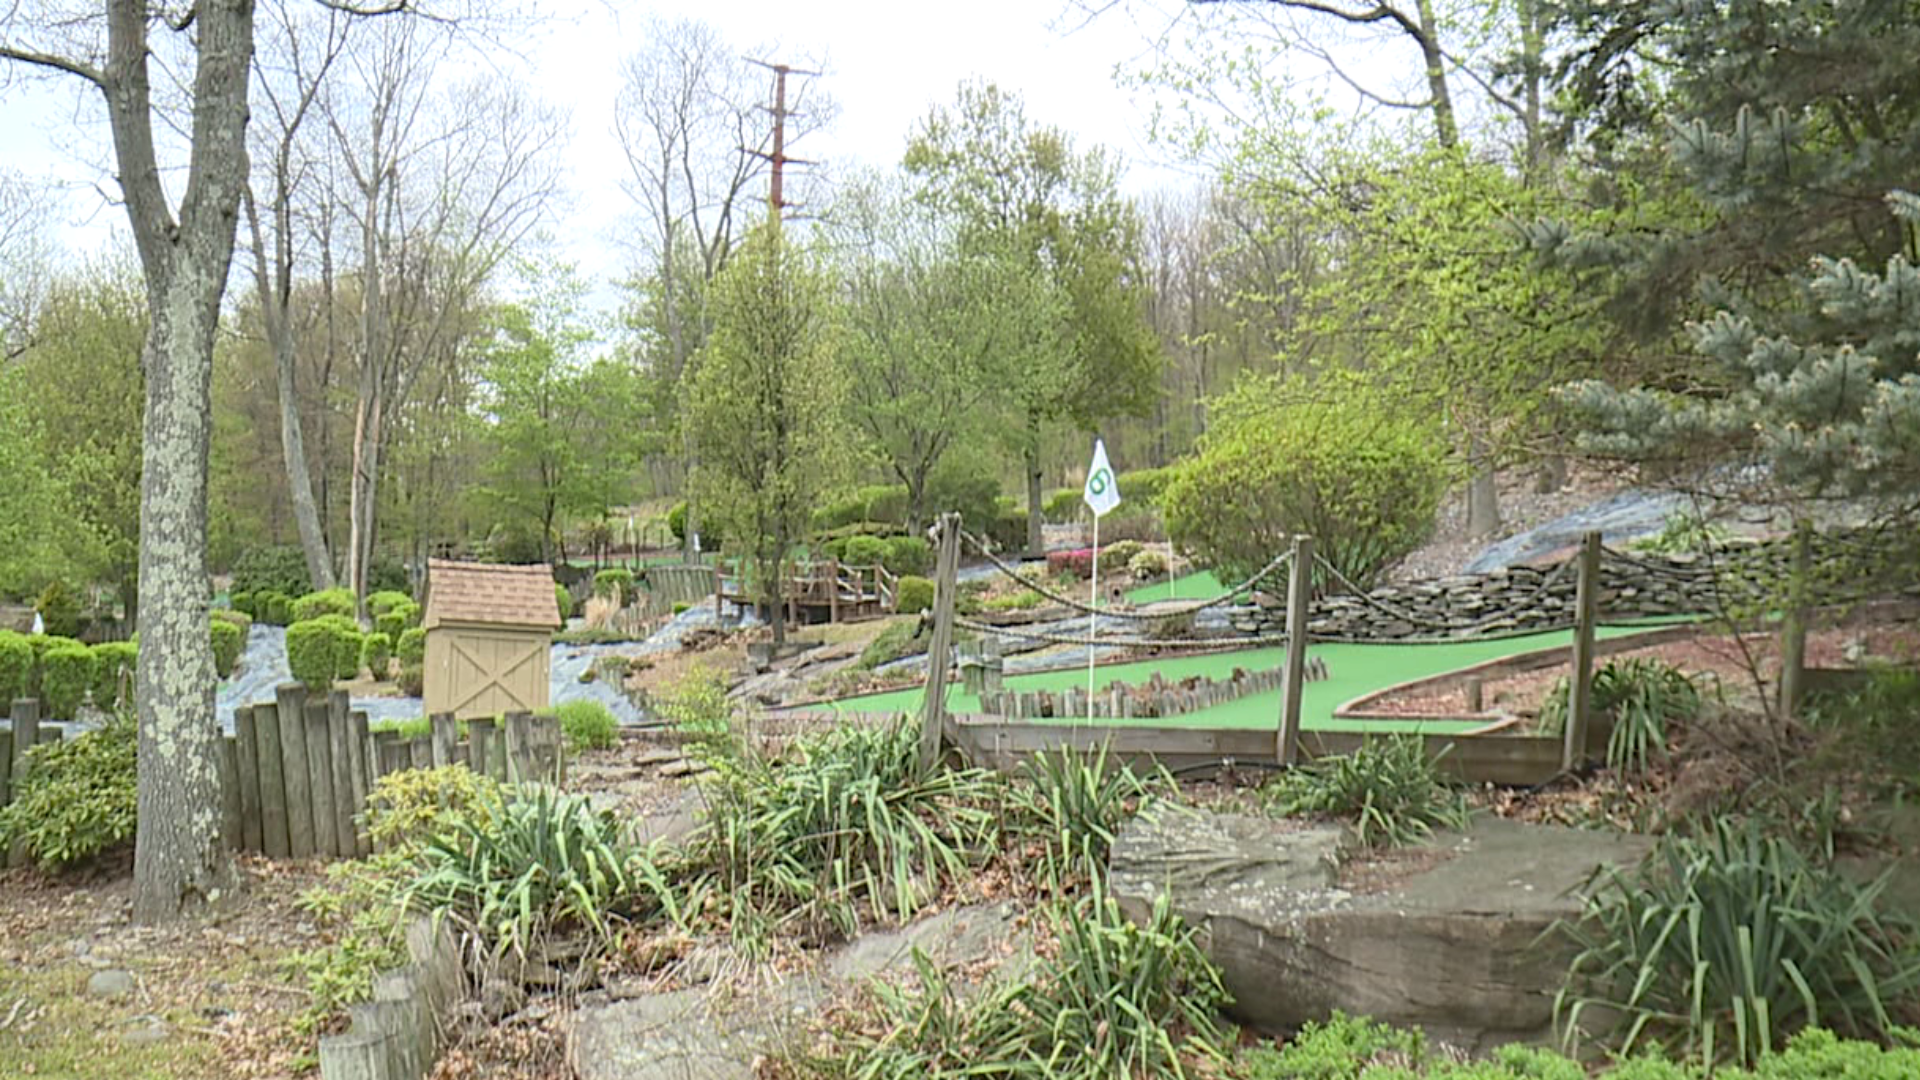 Mini golf open to the public but with some restrictions.